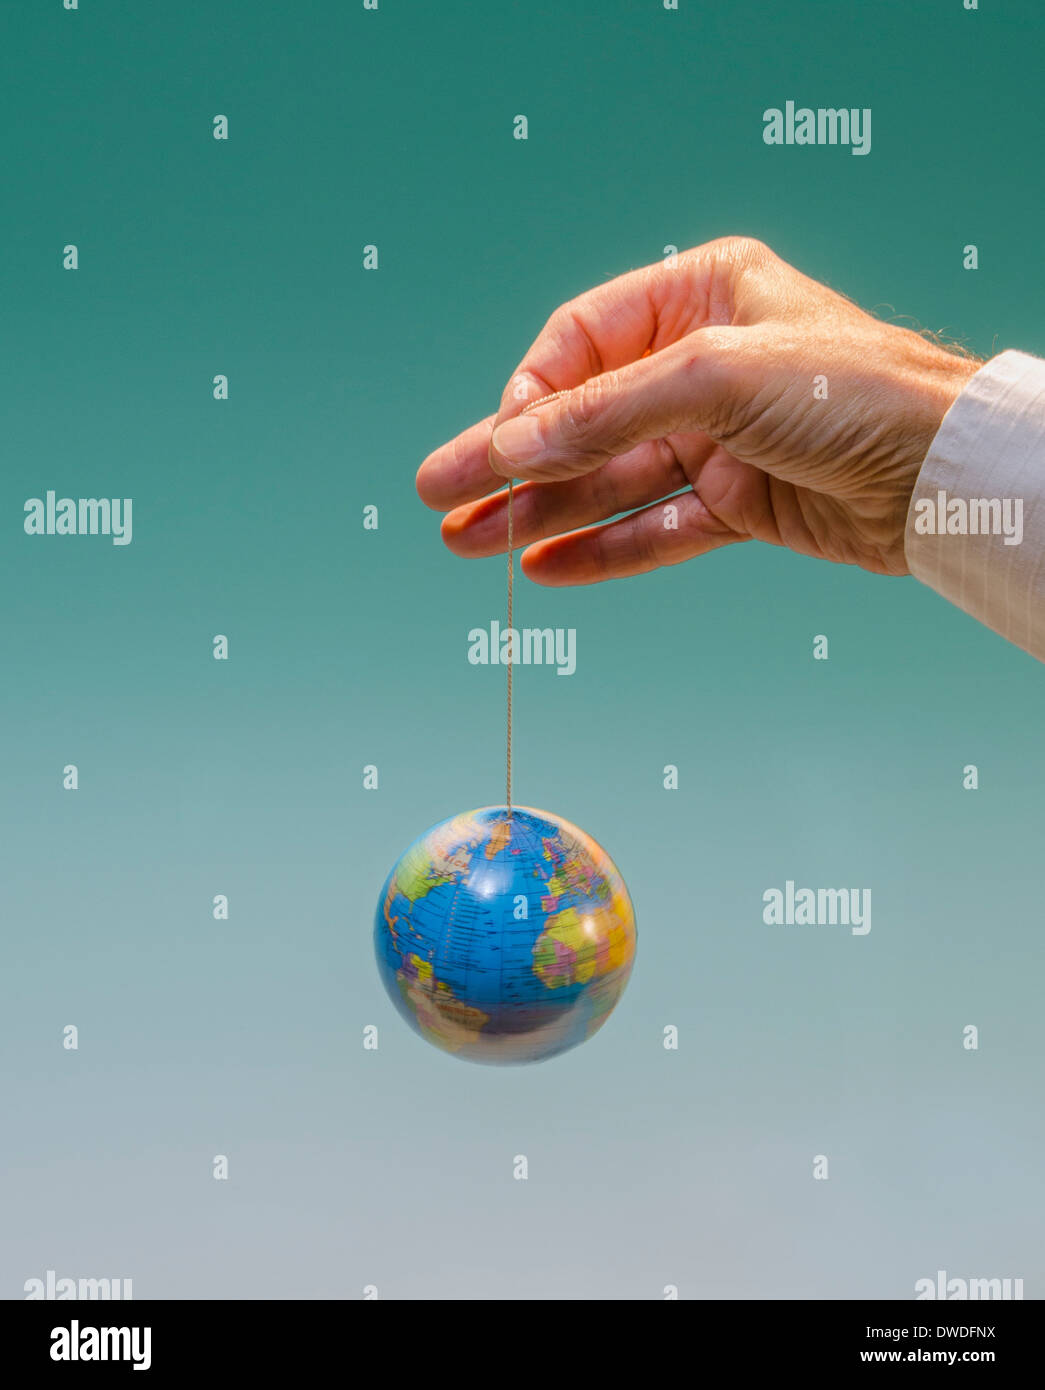 hand with dangling globe with Atlantic Ocean prominent Stock Photo